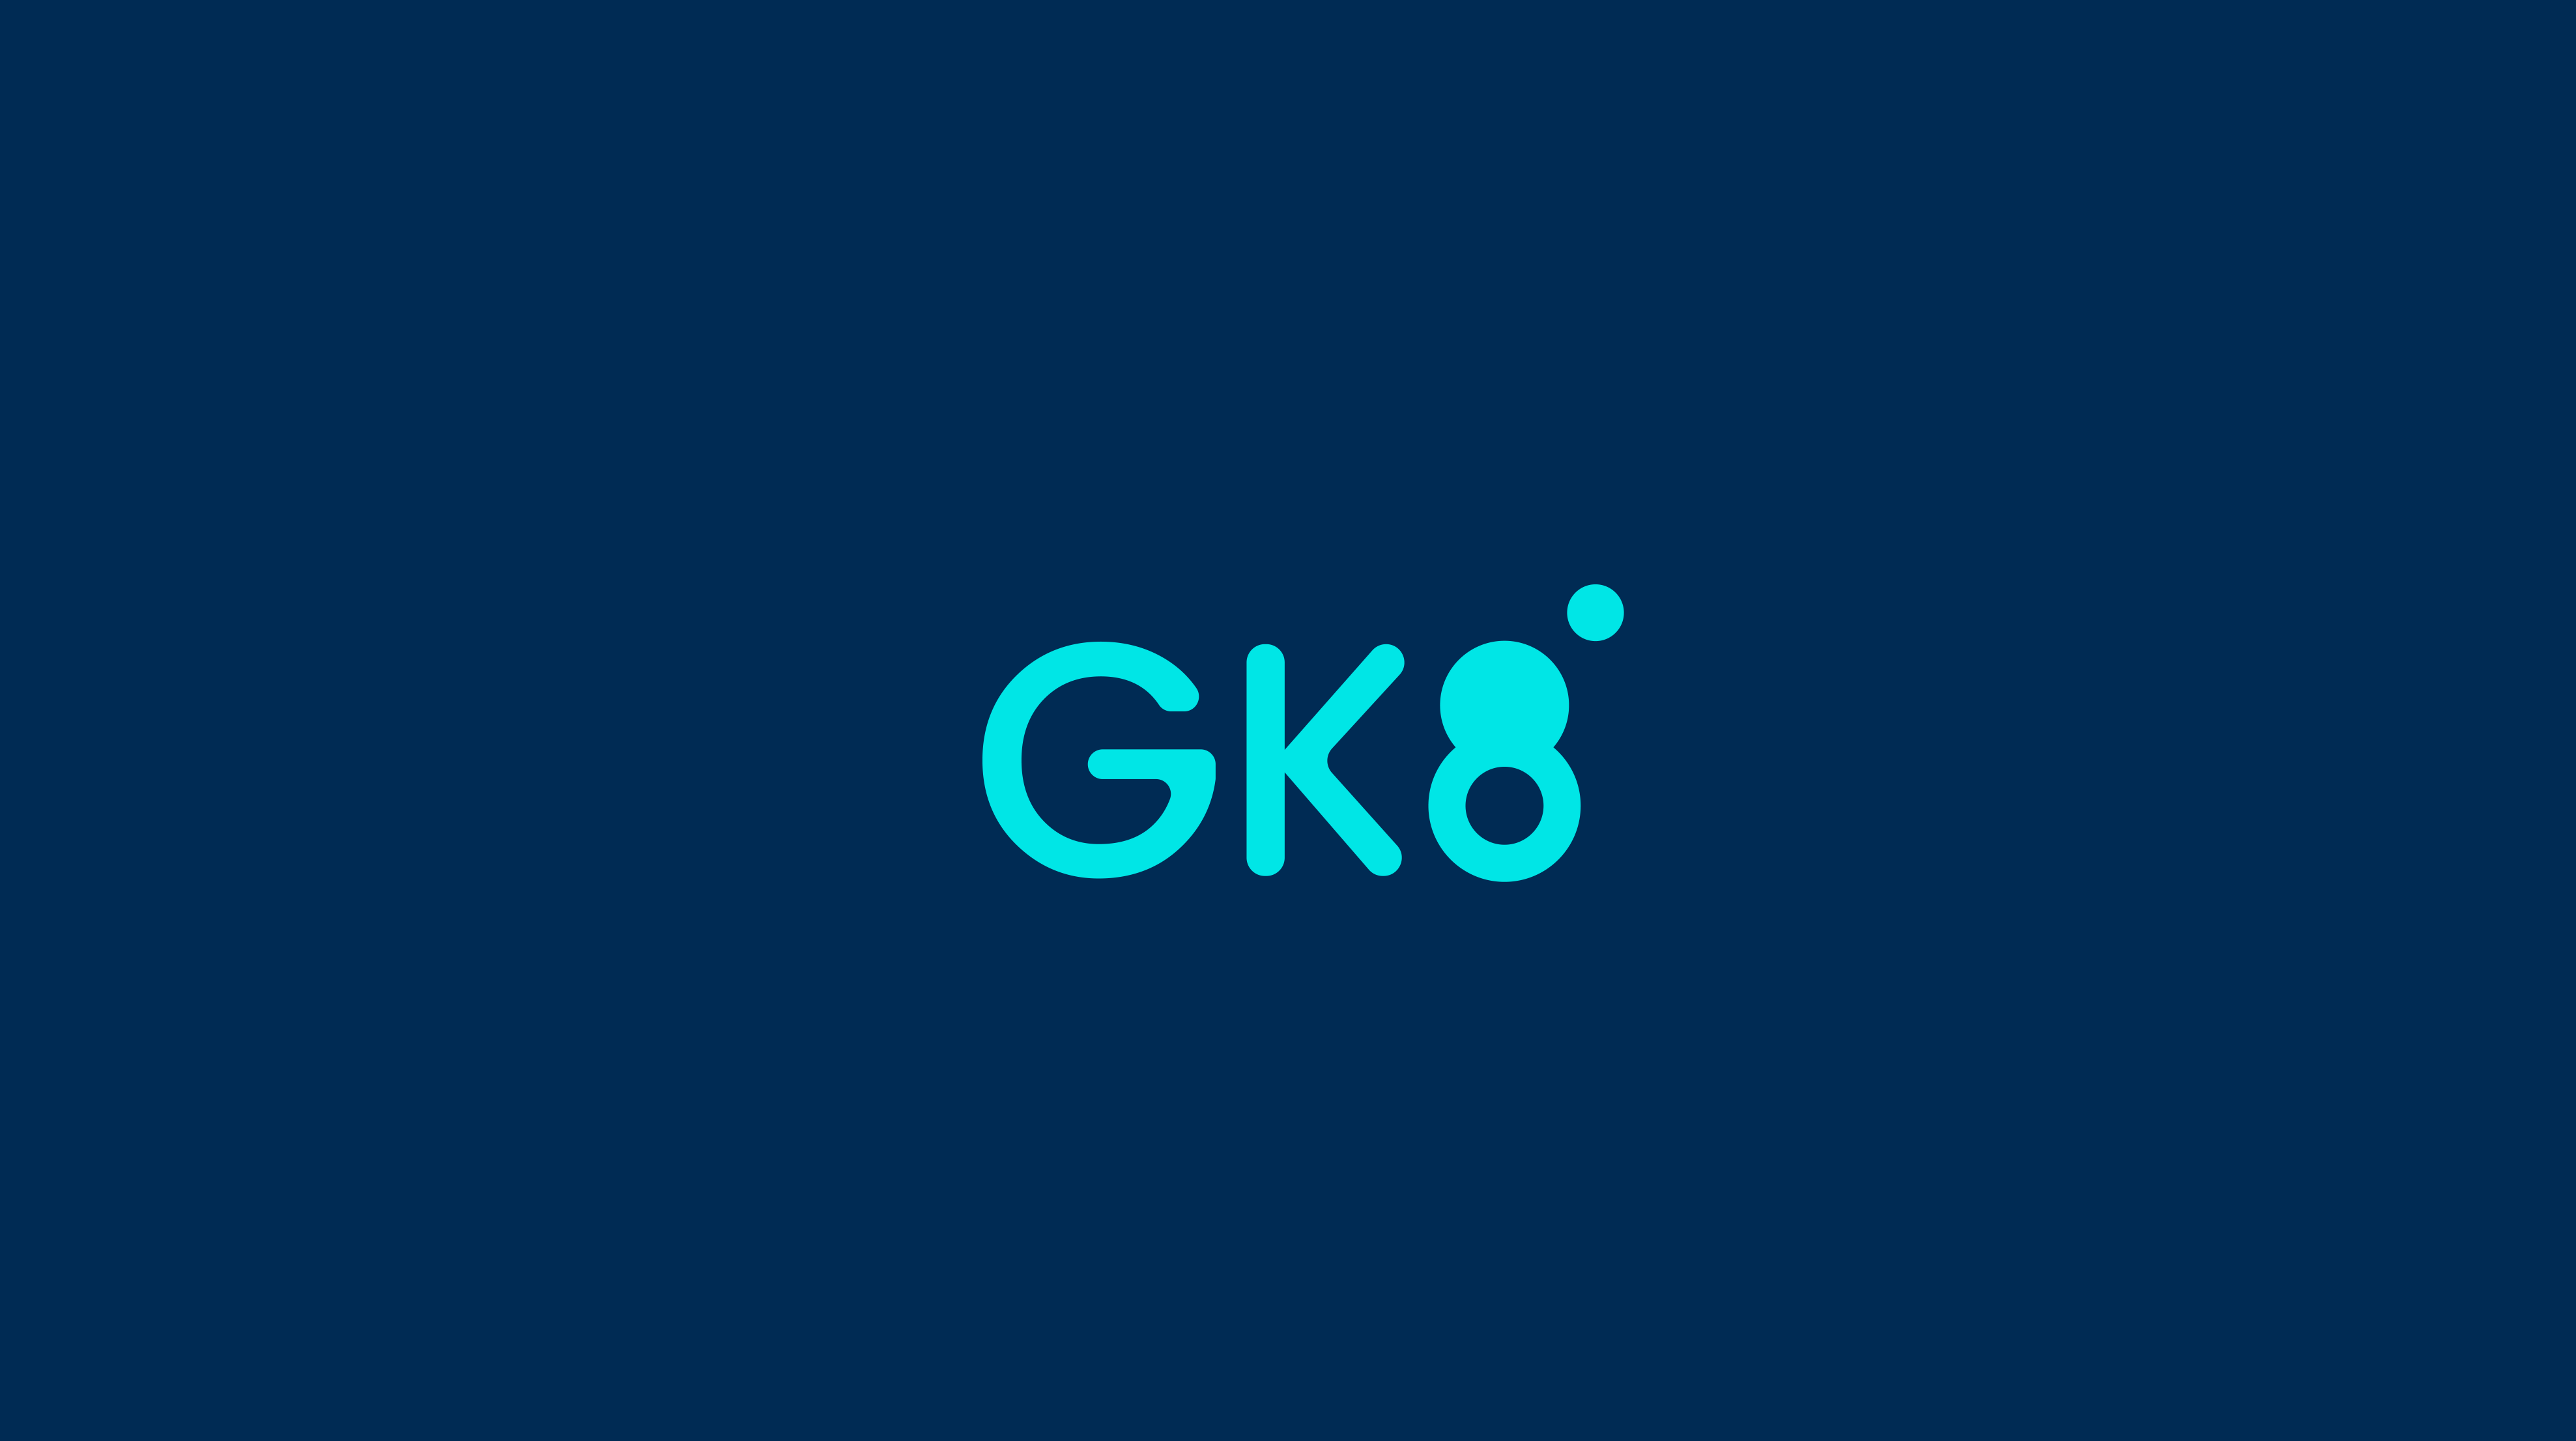 gk8-partners-with-polygon-enhancing-secure-l1-and-l2-support-or-headlines-or-news-or-coinmarketcap